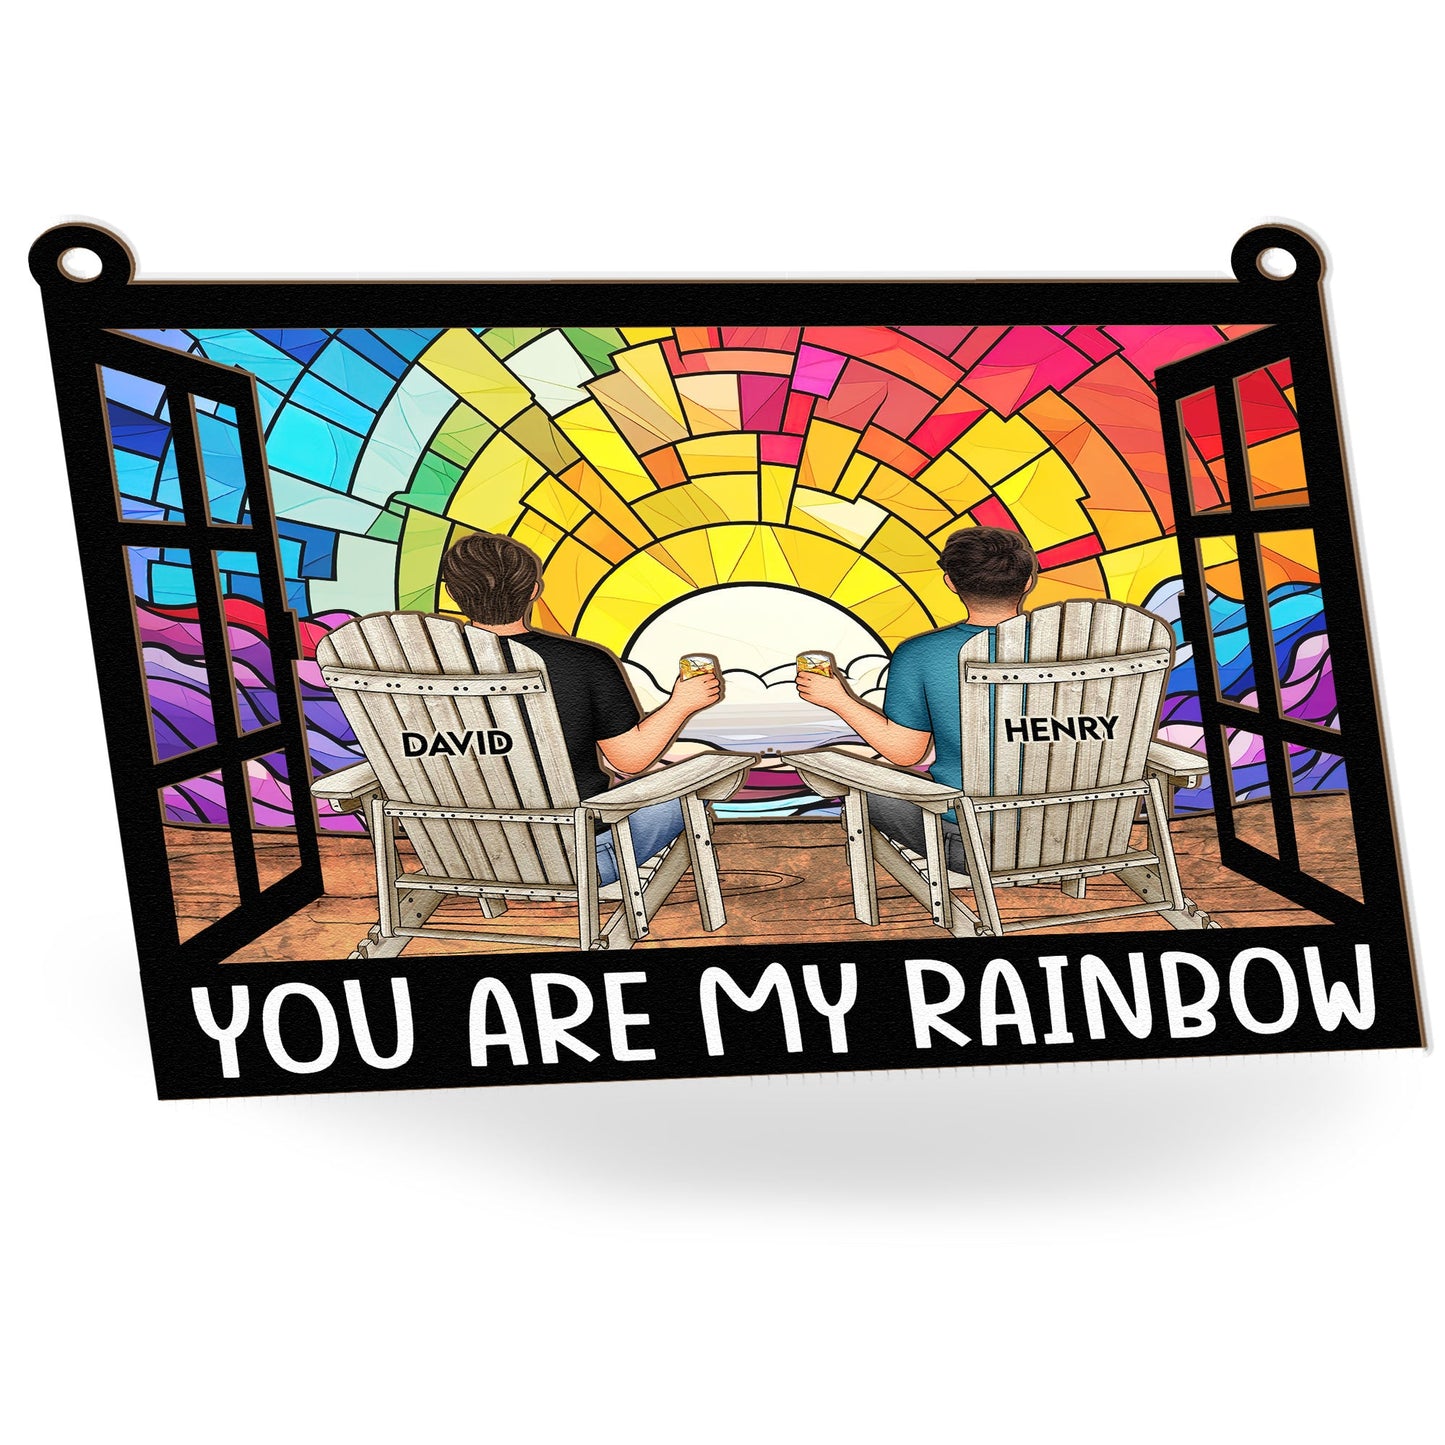 You Are My Rainbow - Personalized Window Hanging Suncatcher Ornament